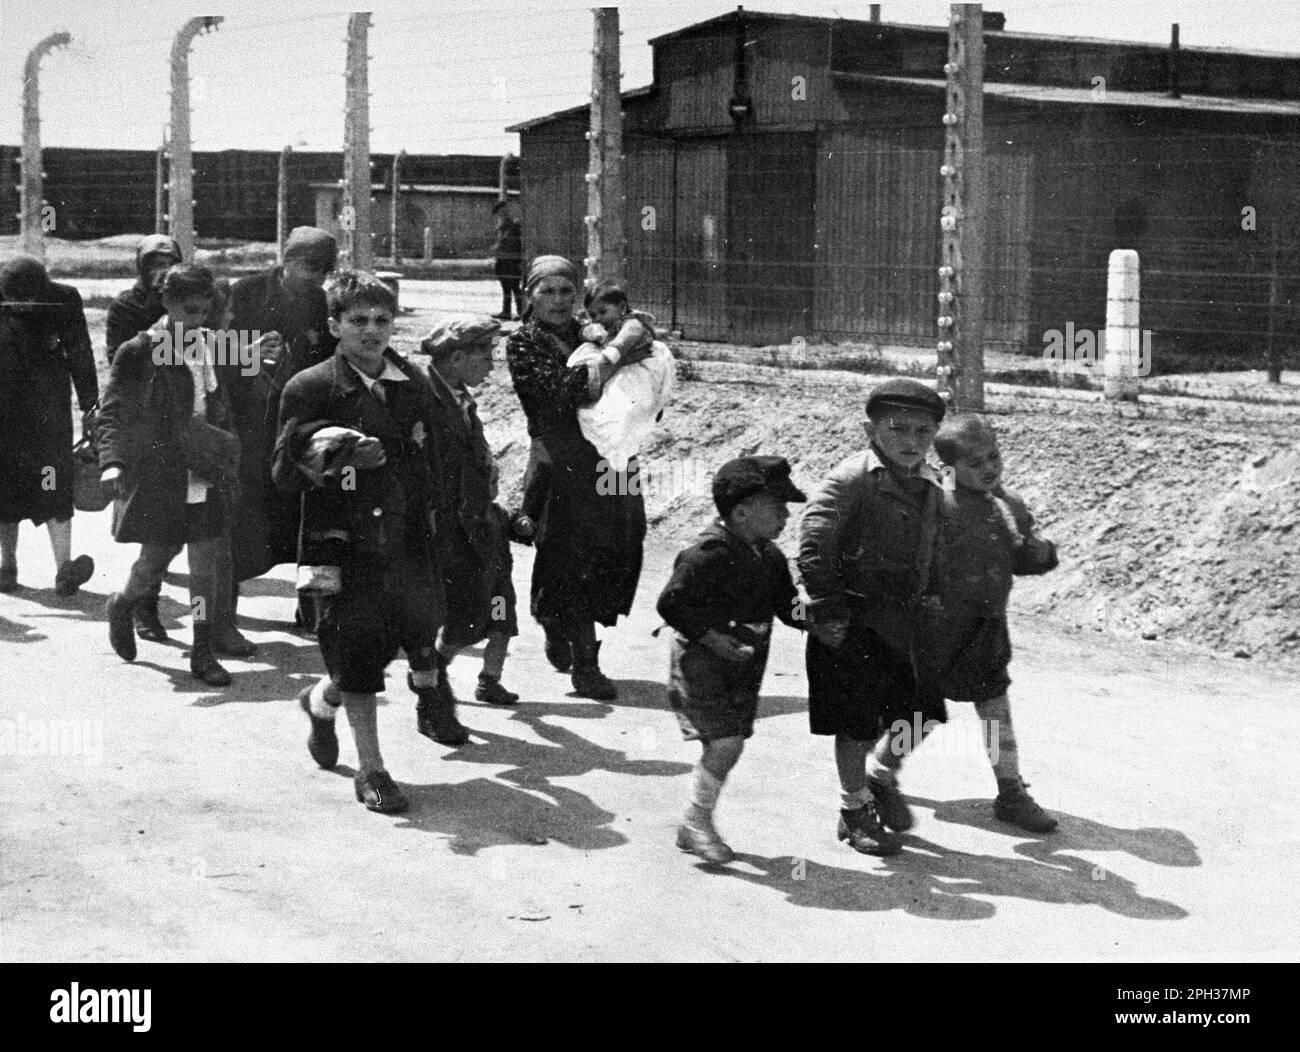 Children from Carpathian Ruthenia walking towards the gas chambers. After the selection process on the train station platform, those doomed to die were walked directly to the gas chambers. Stock Photo